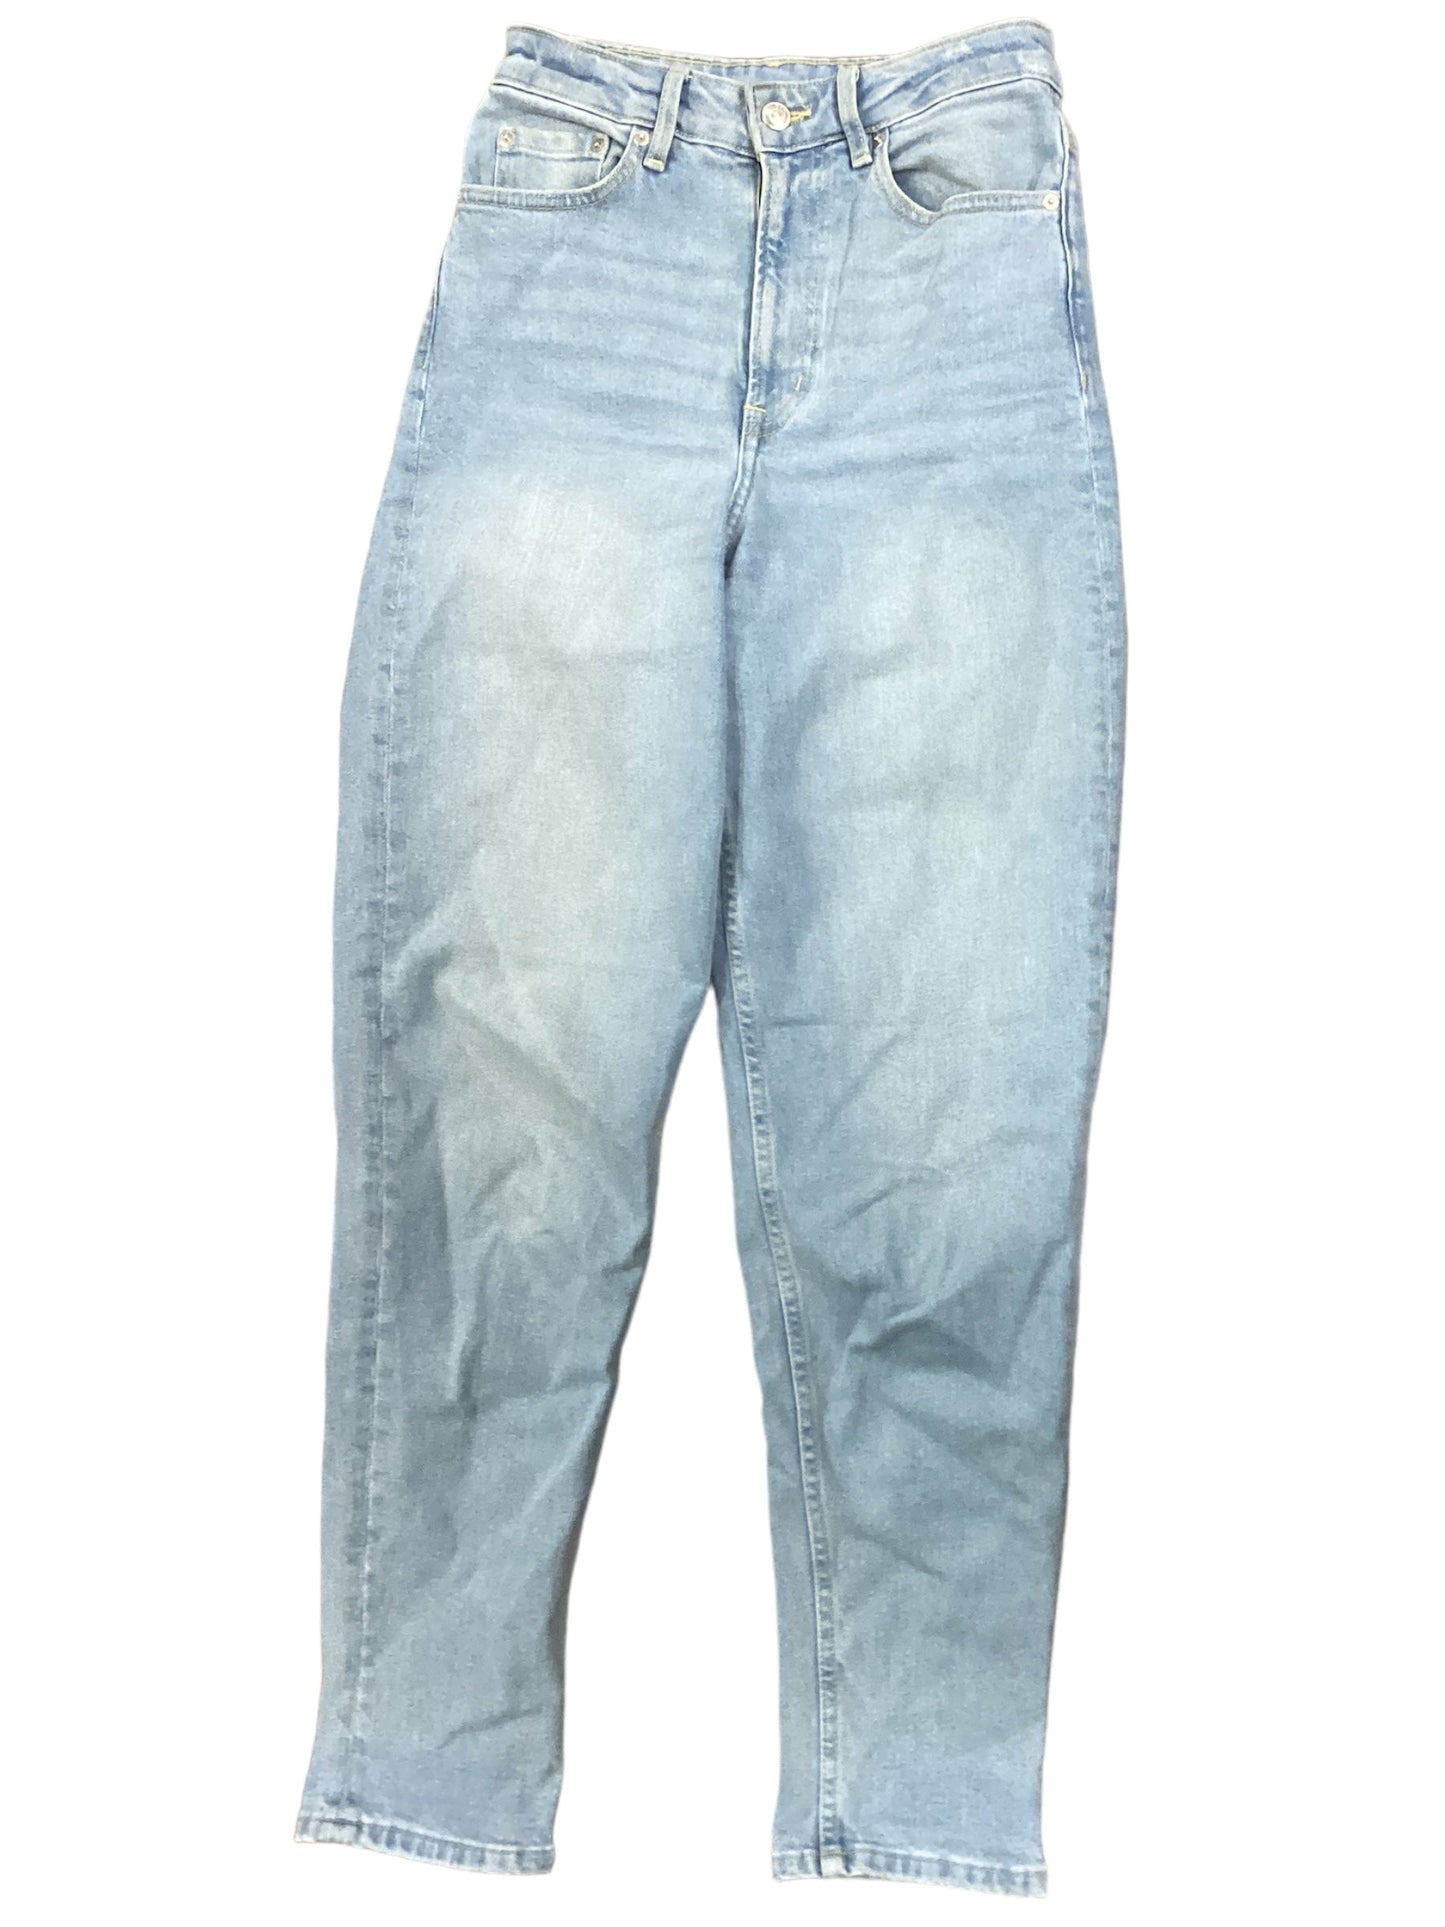 Jeans Relaxed/boyfriend By H&m  Size: 4